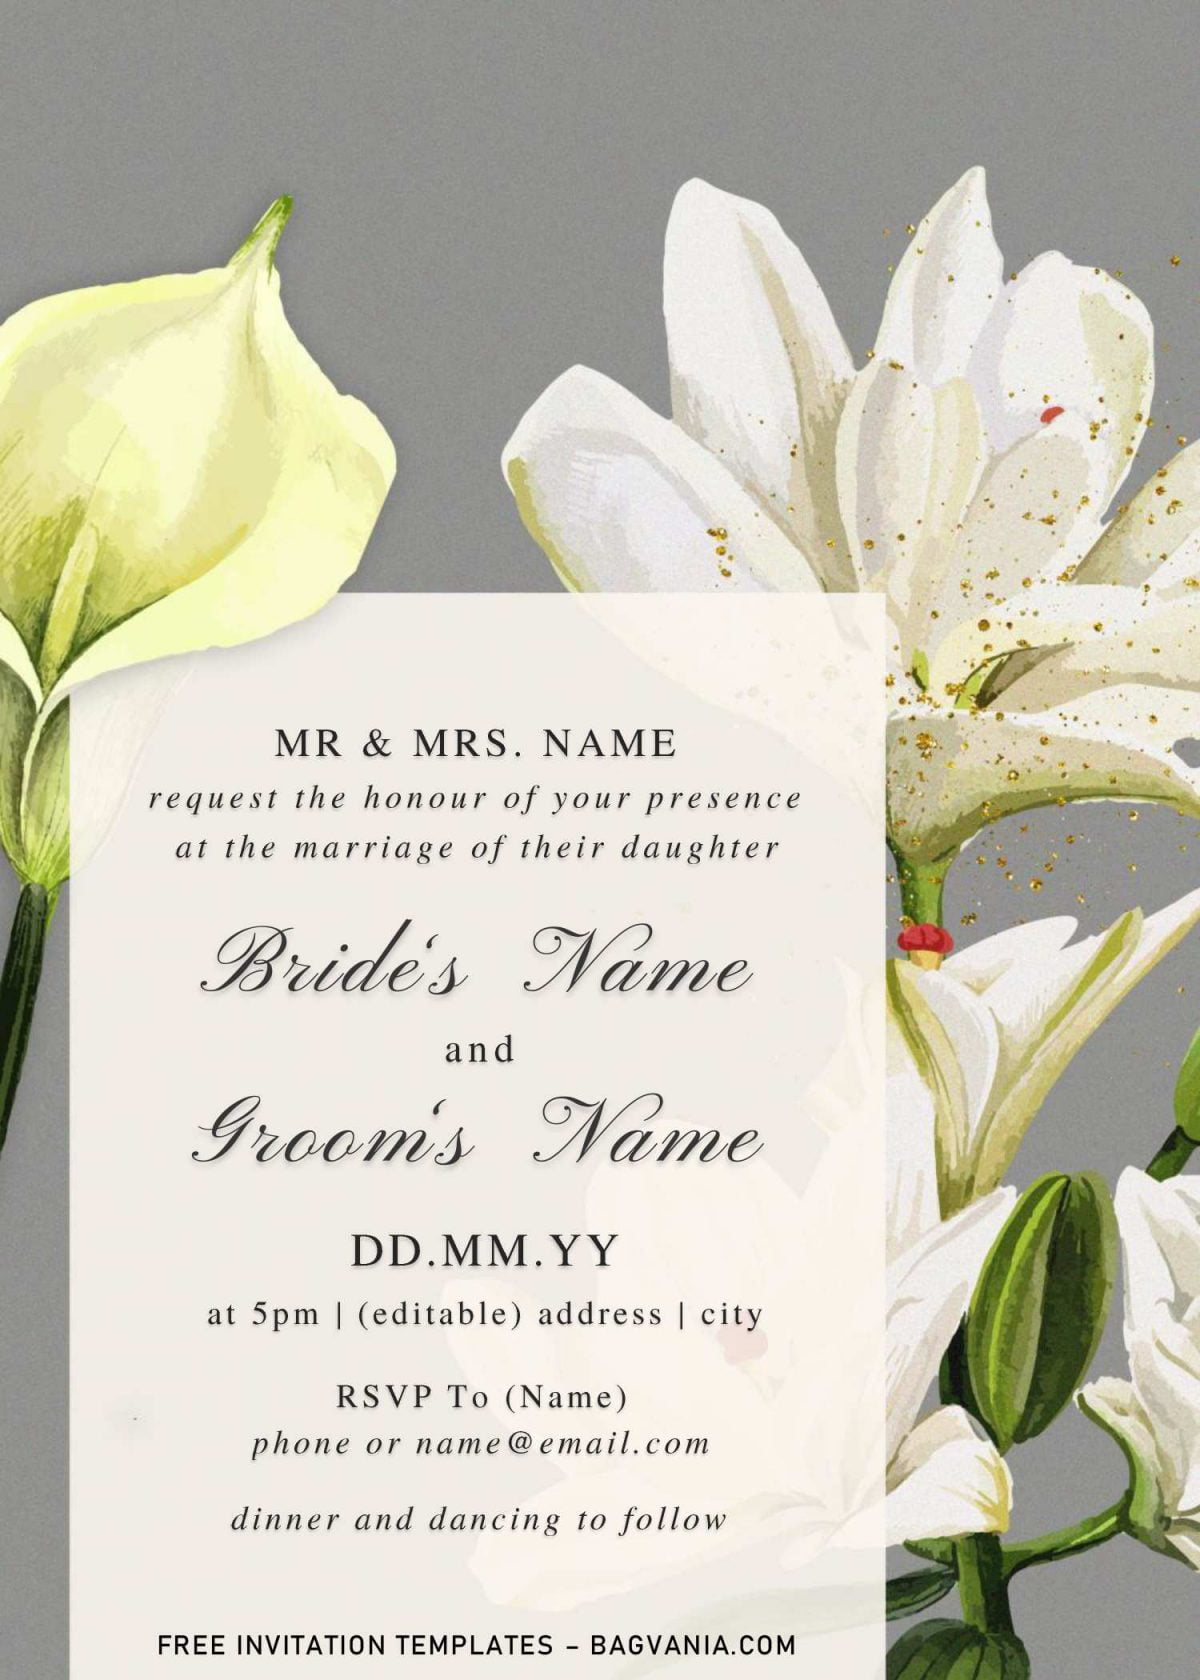 Free Watercolor Lily Wedding Invitation Templates For Word and has white pinkish lily